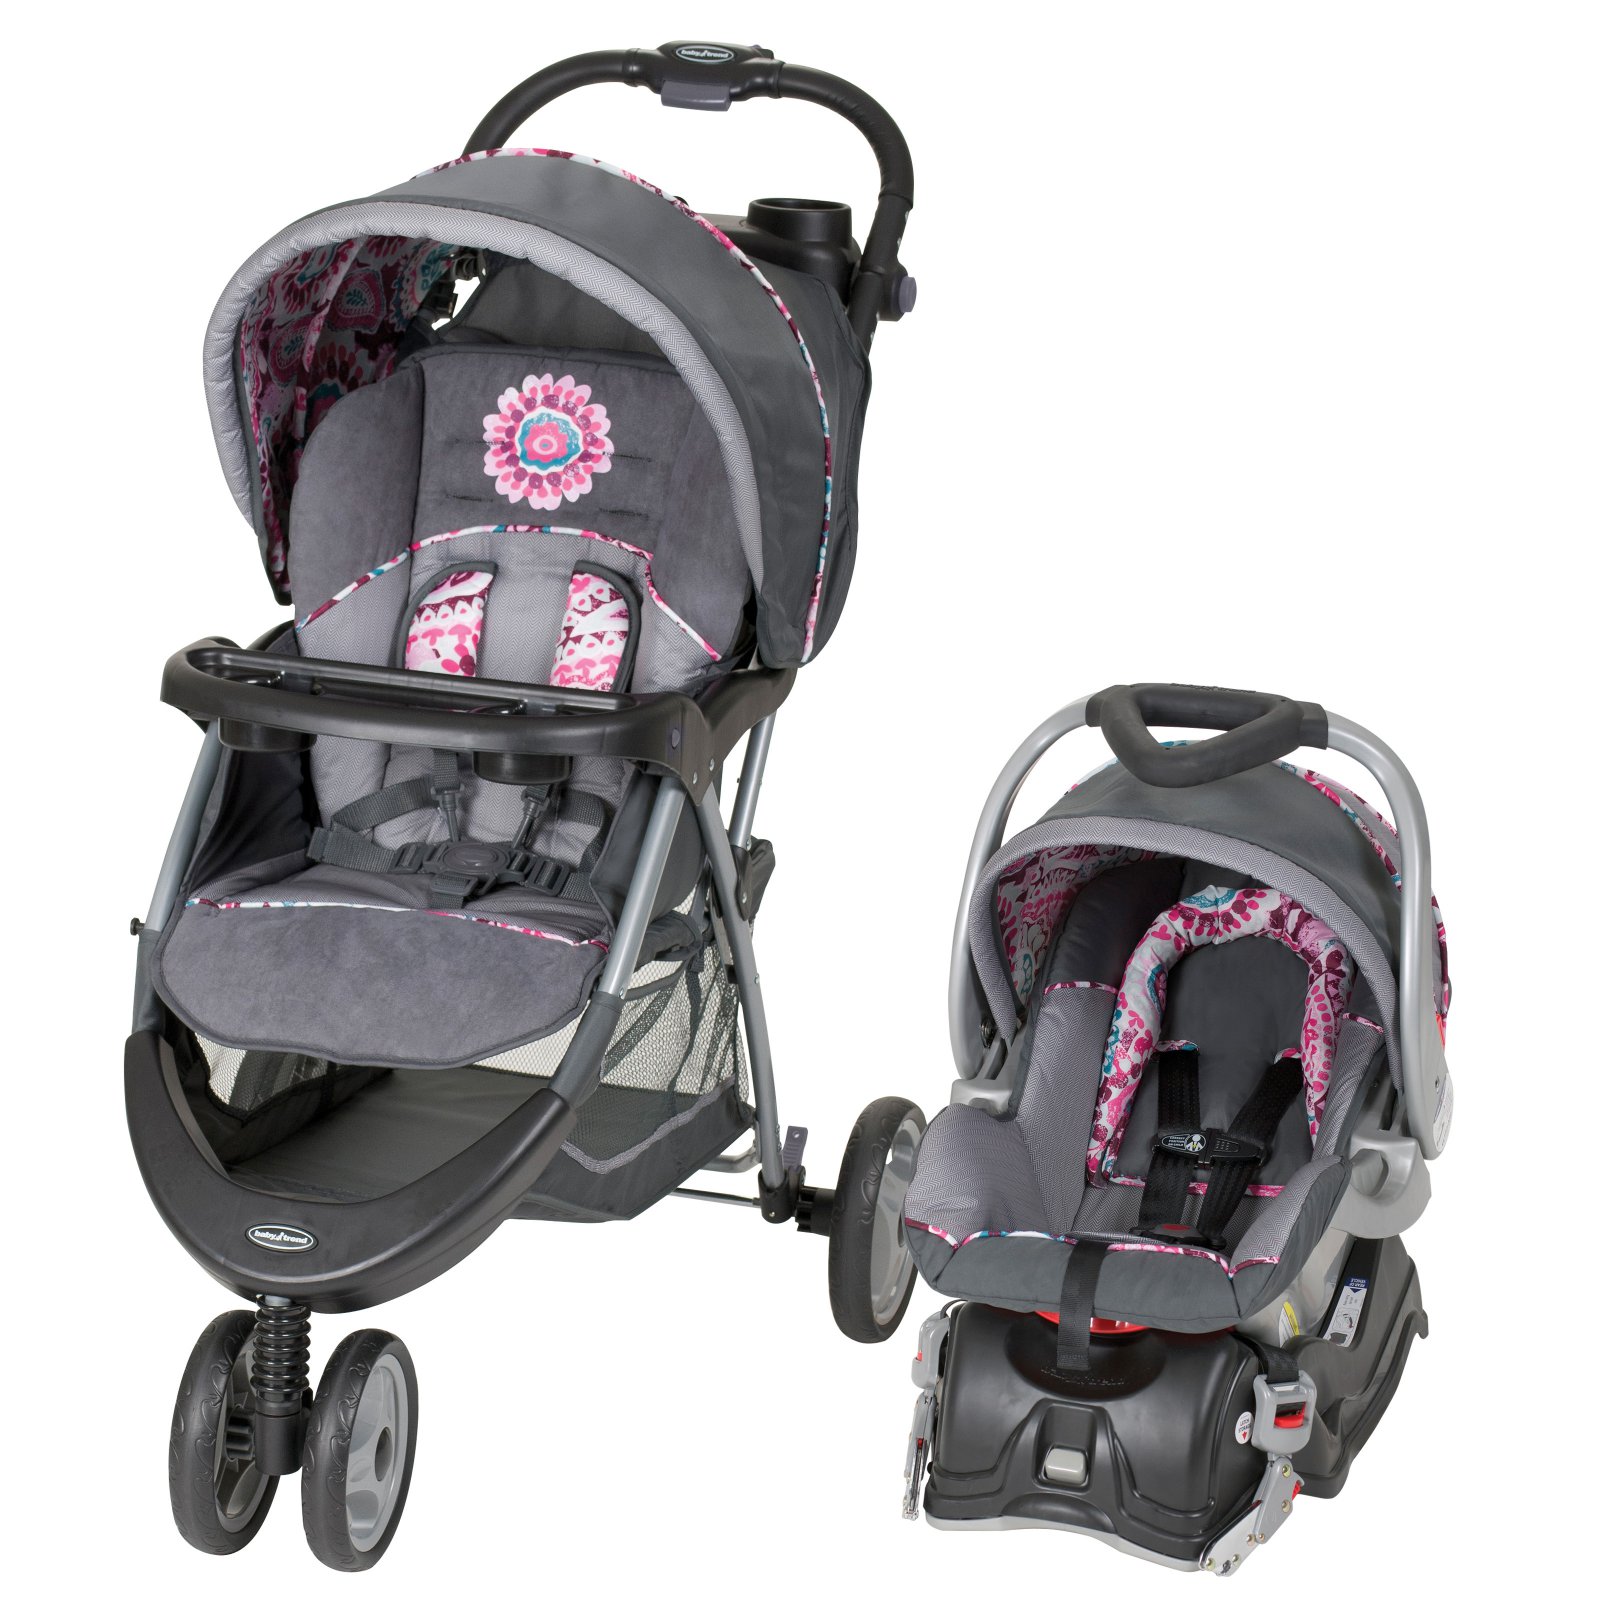 Baby Trend EZ Ride 5 Travel System, Paisley - image 1 of 6